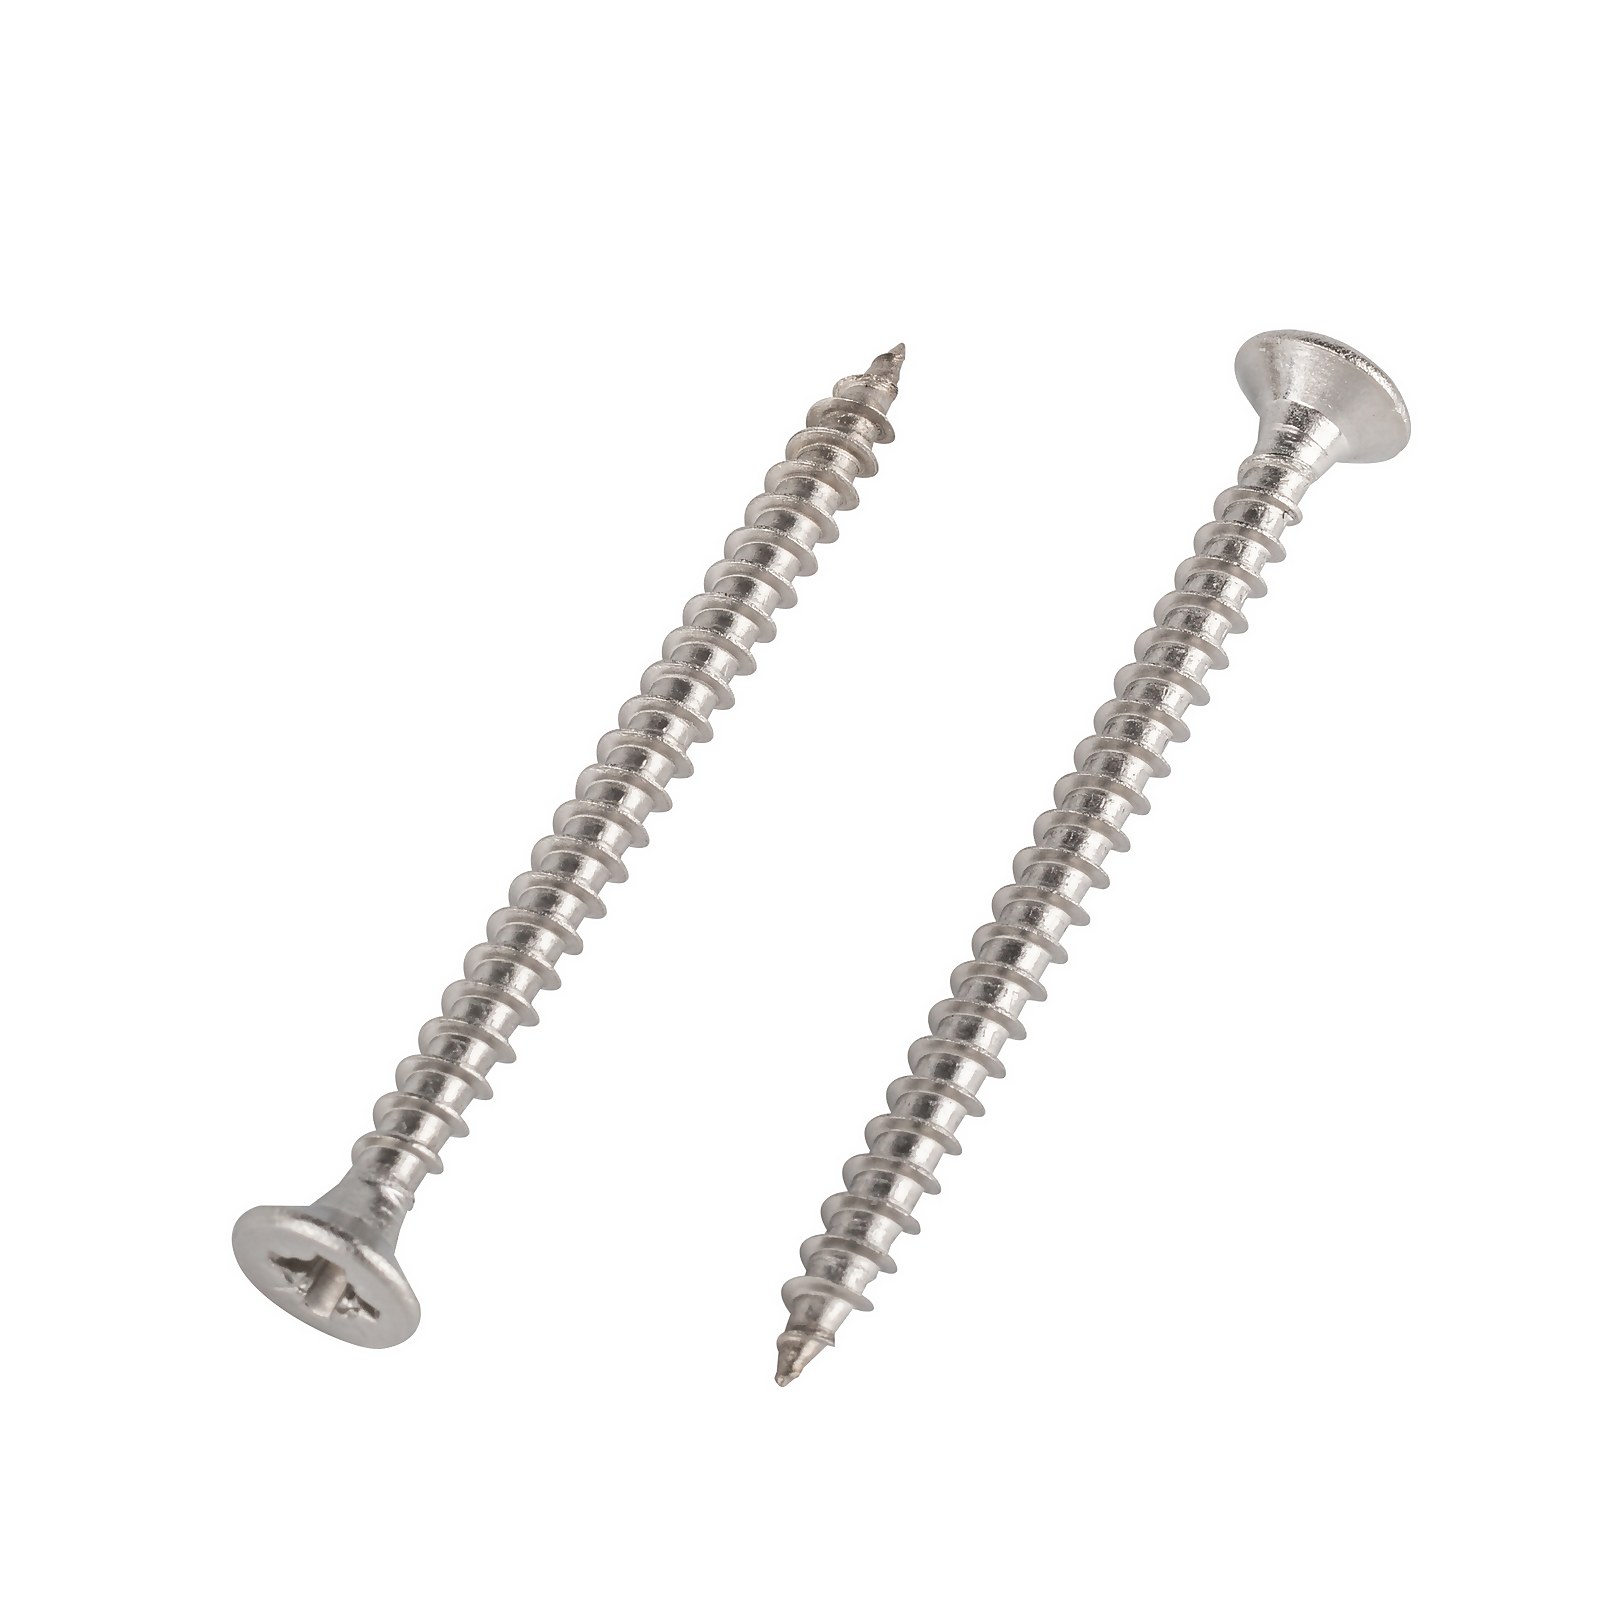 Photo of Homebase Stainless Steel Single Thread Screw 4 X 50mm 100 Pack